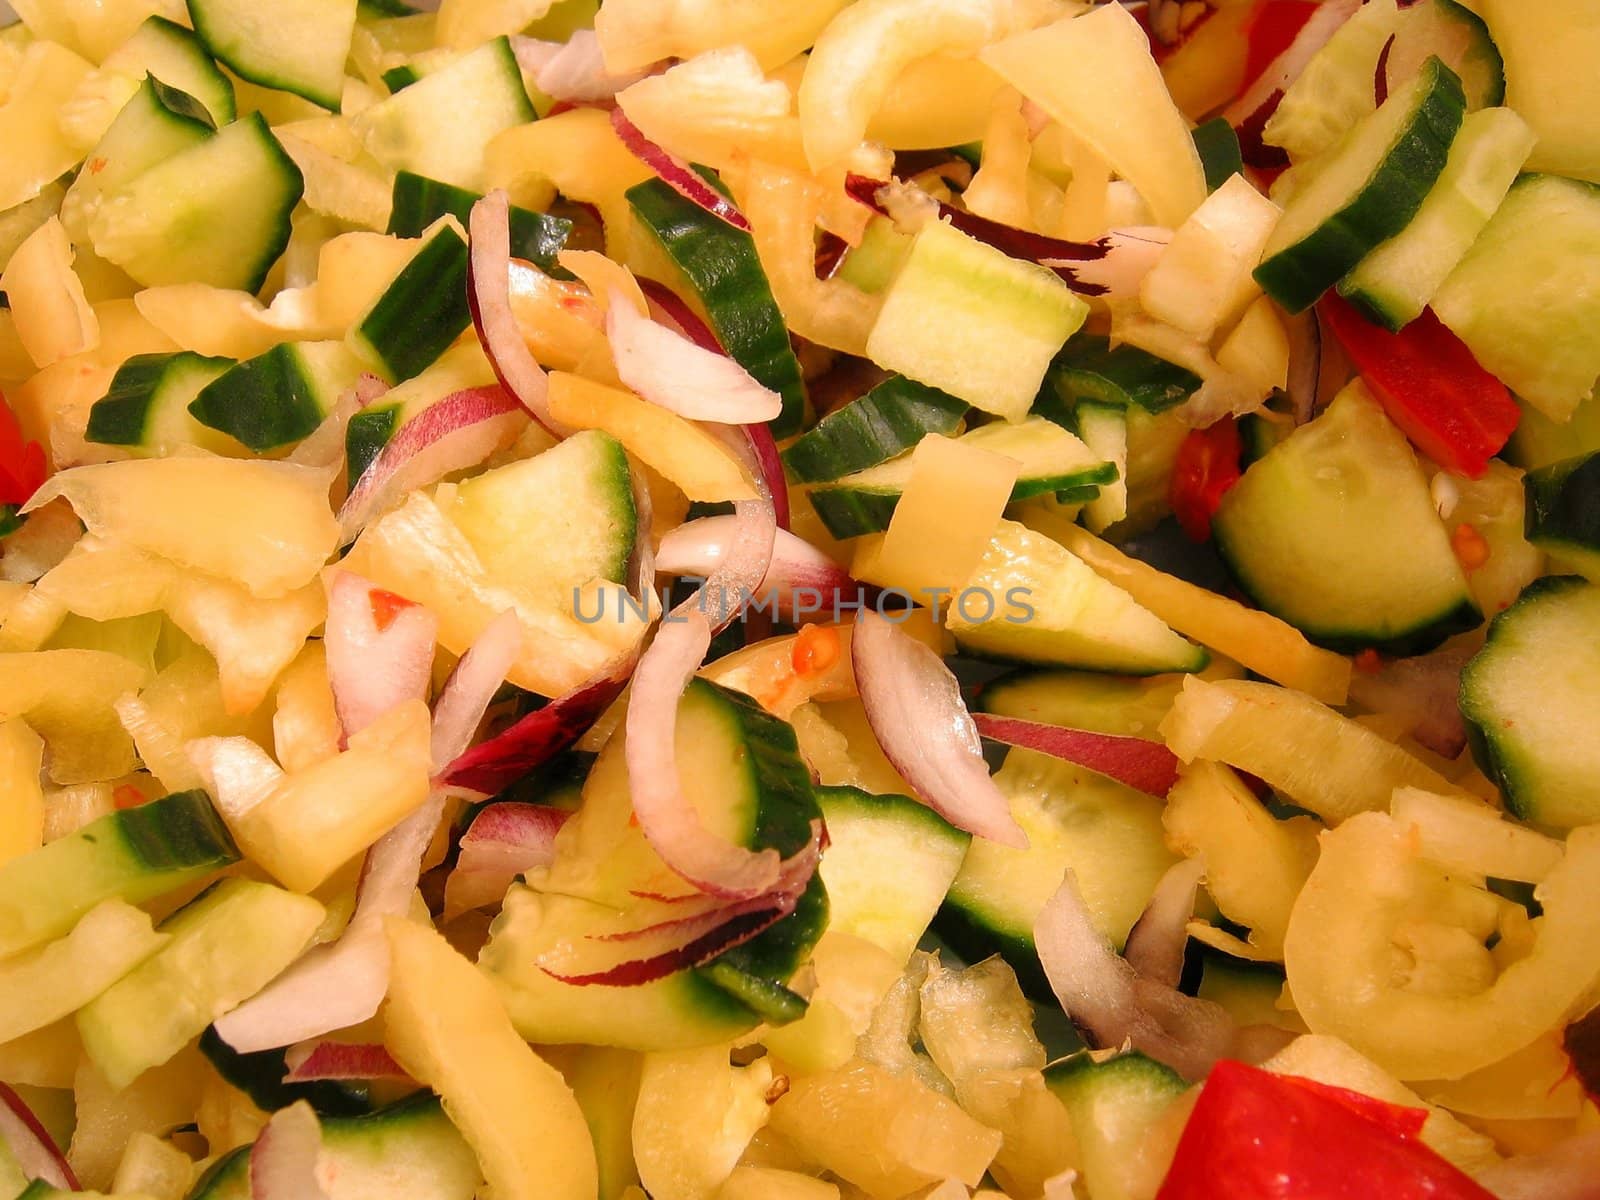 Pieces of chopped vegetables